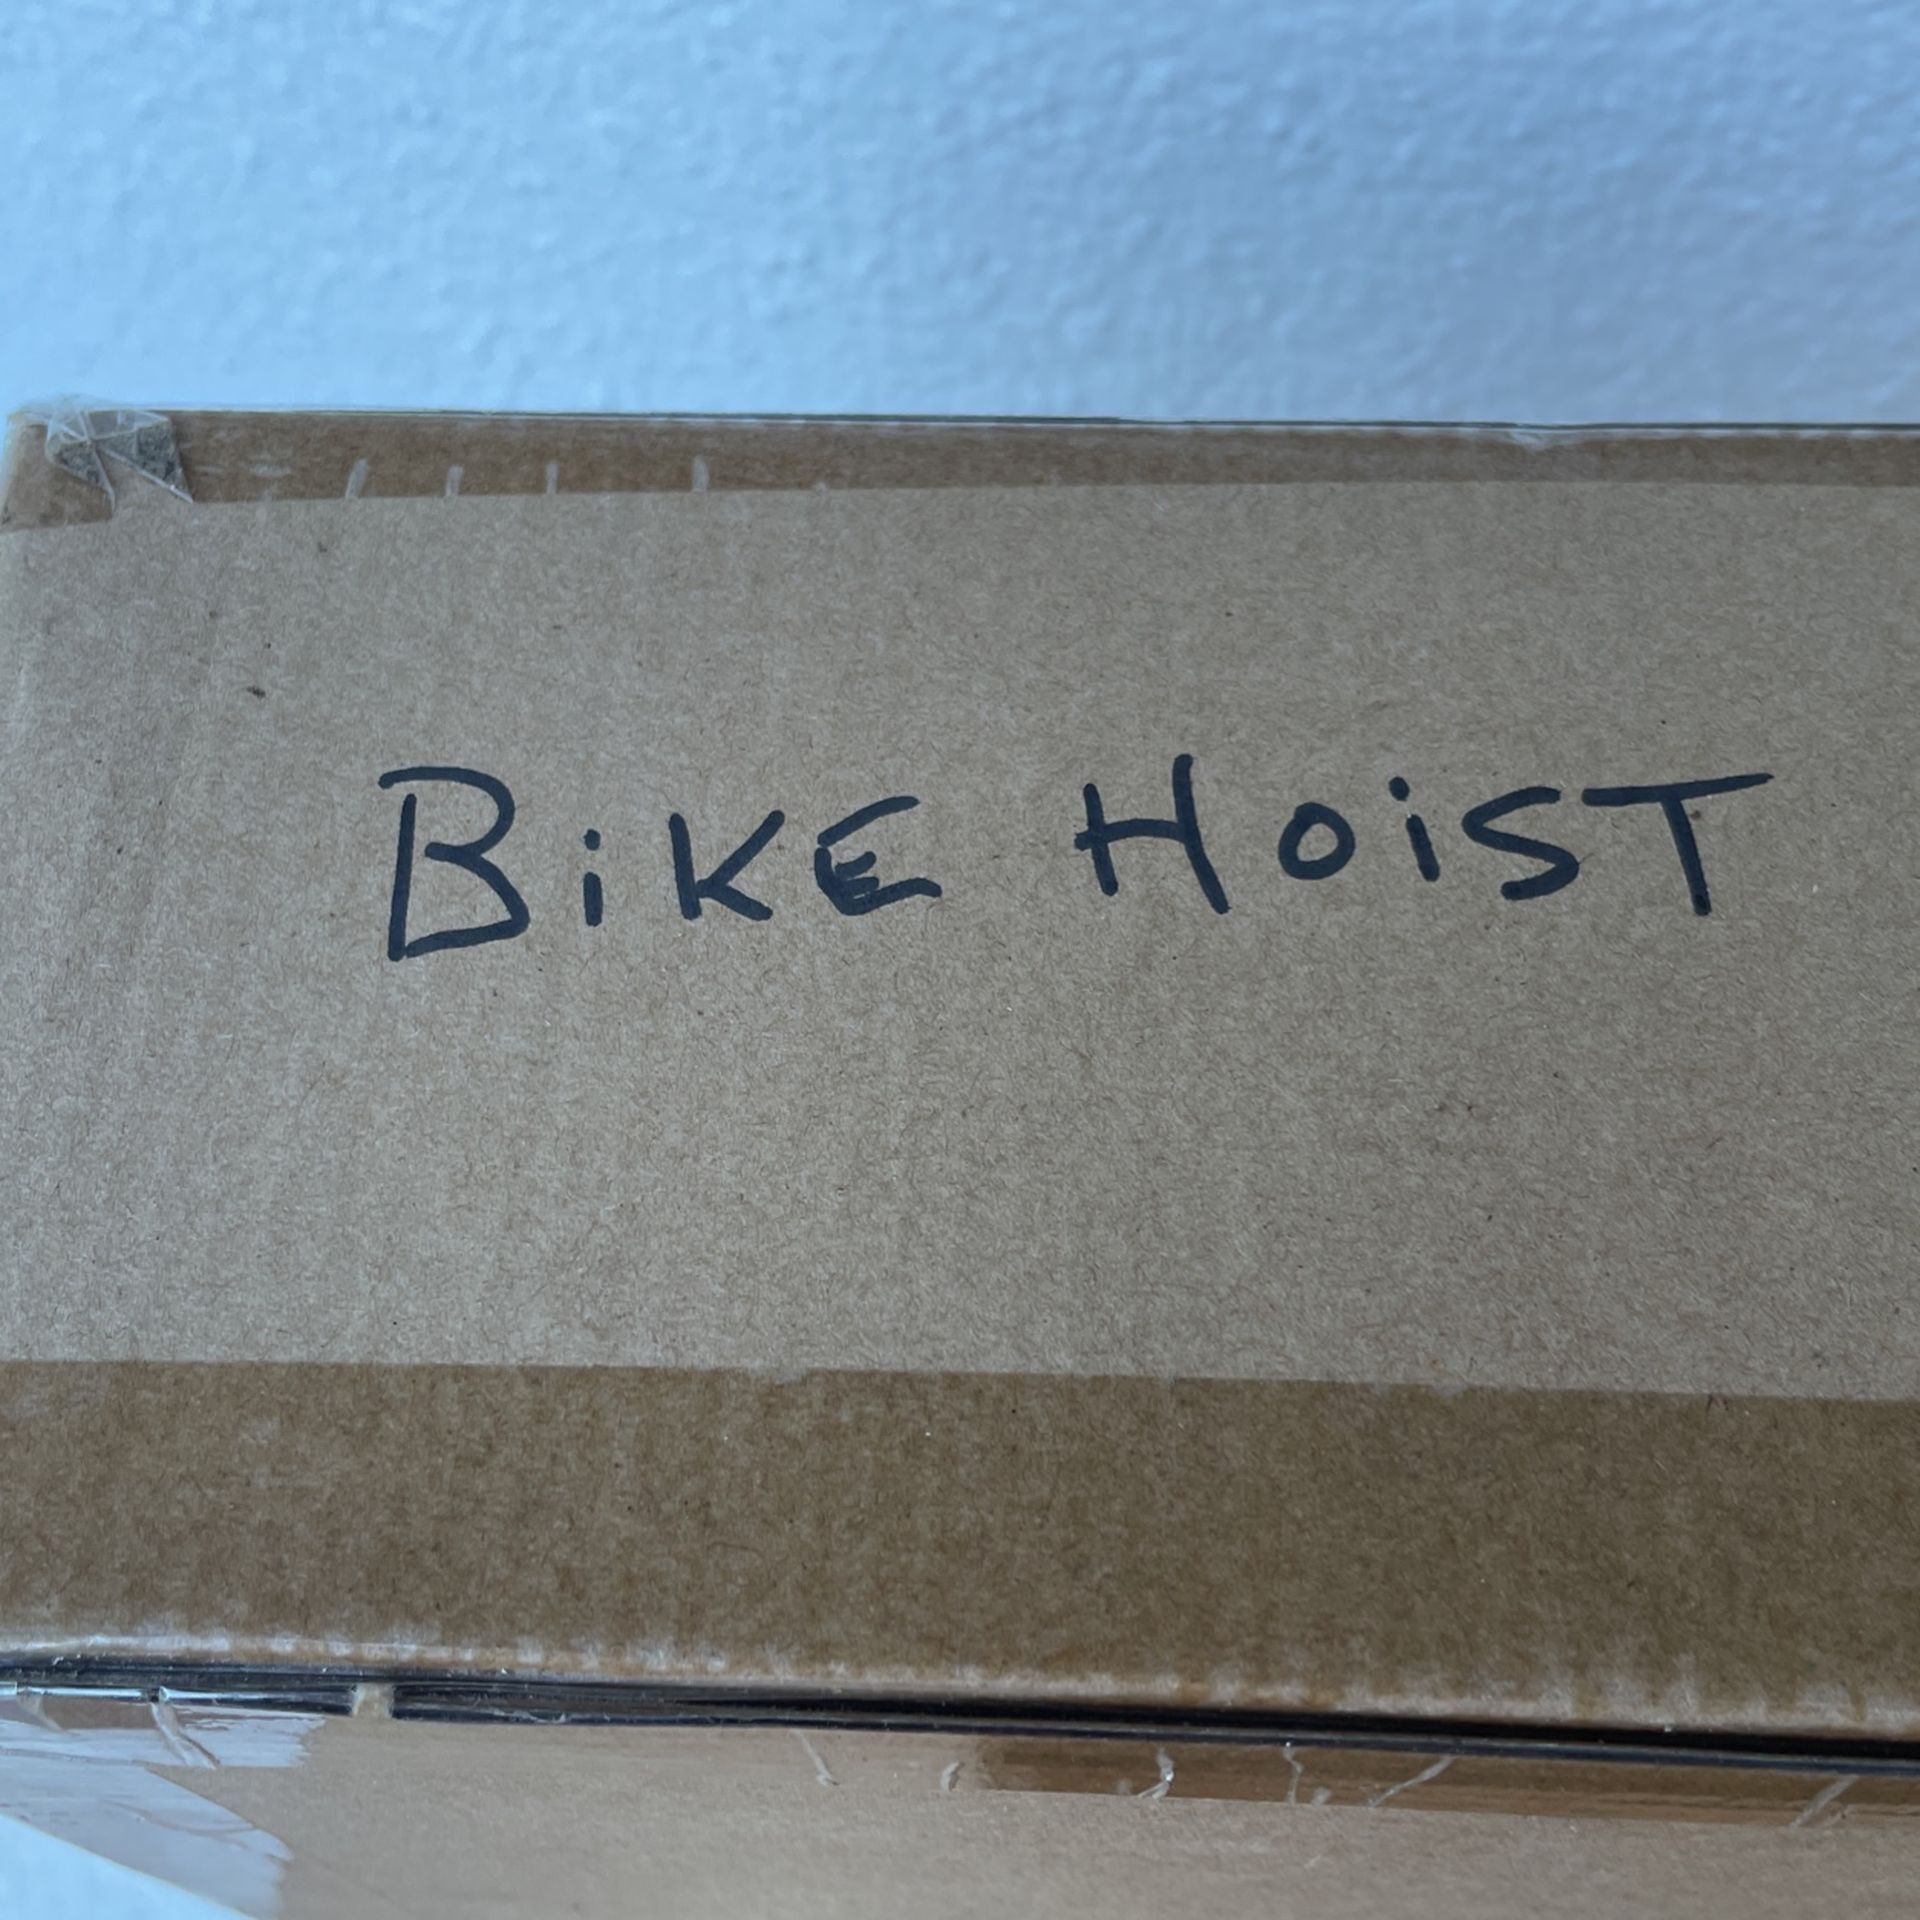 4 Sets New In Box Bicycle Garage Hoists